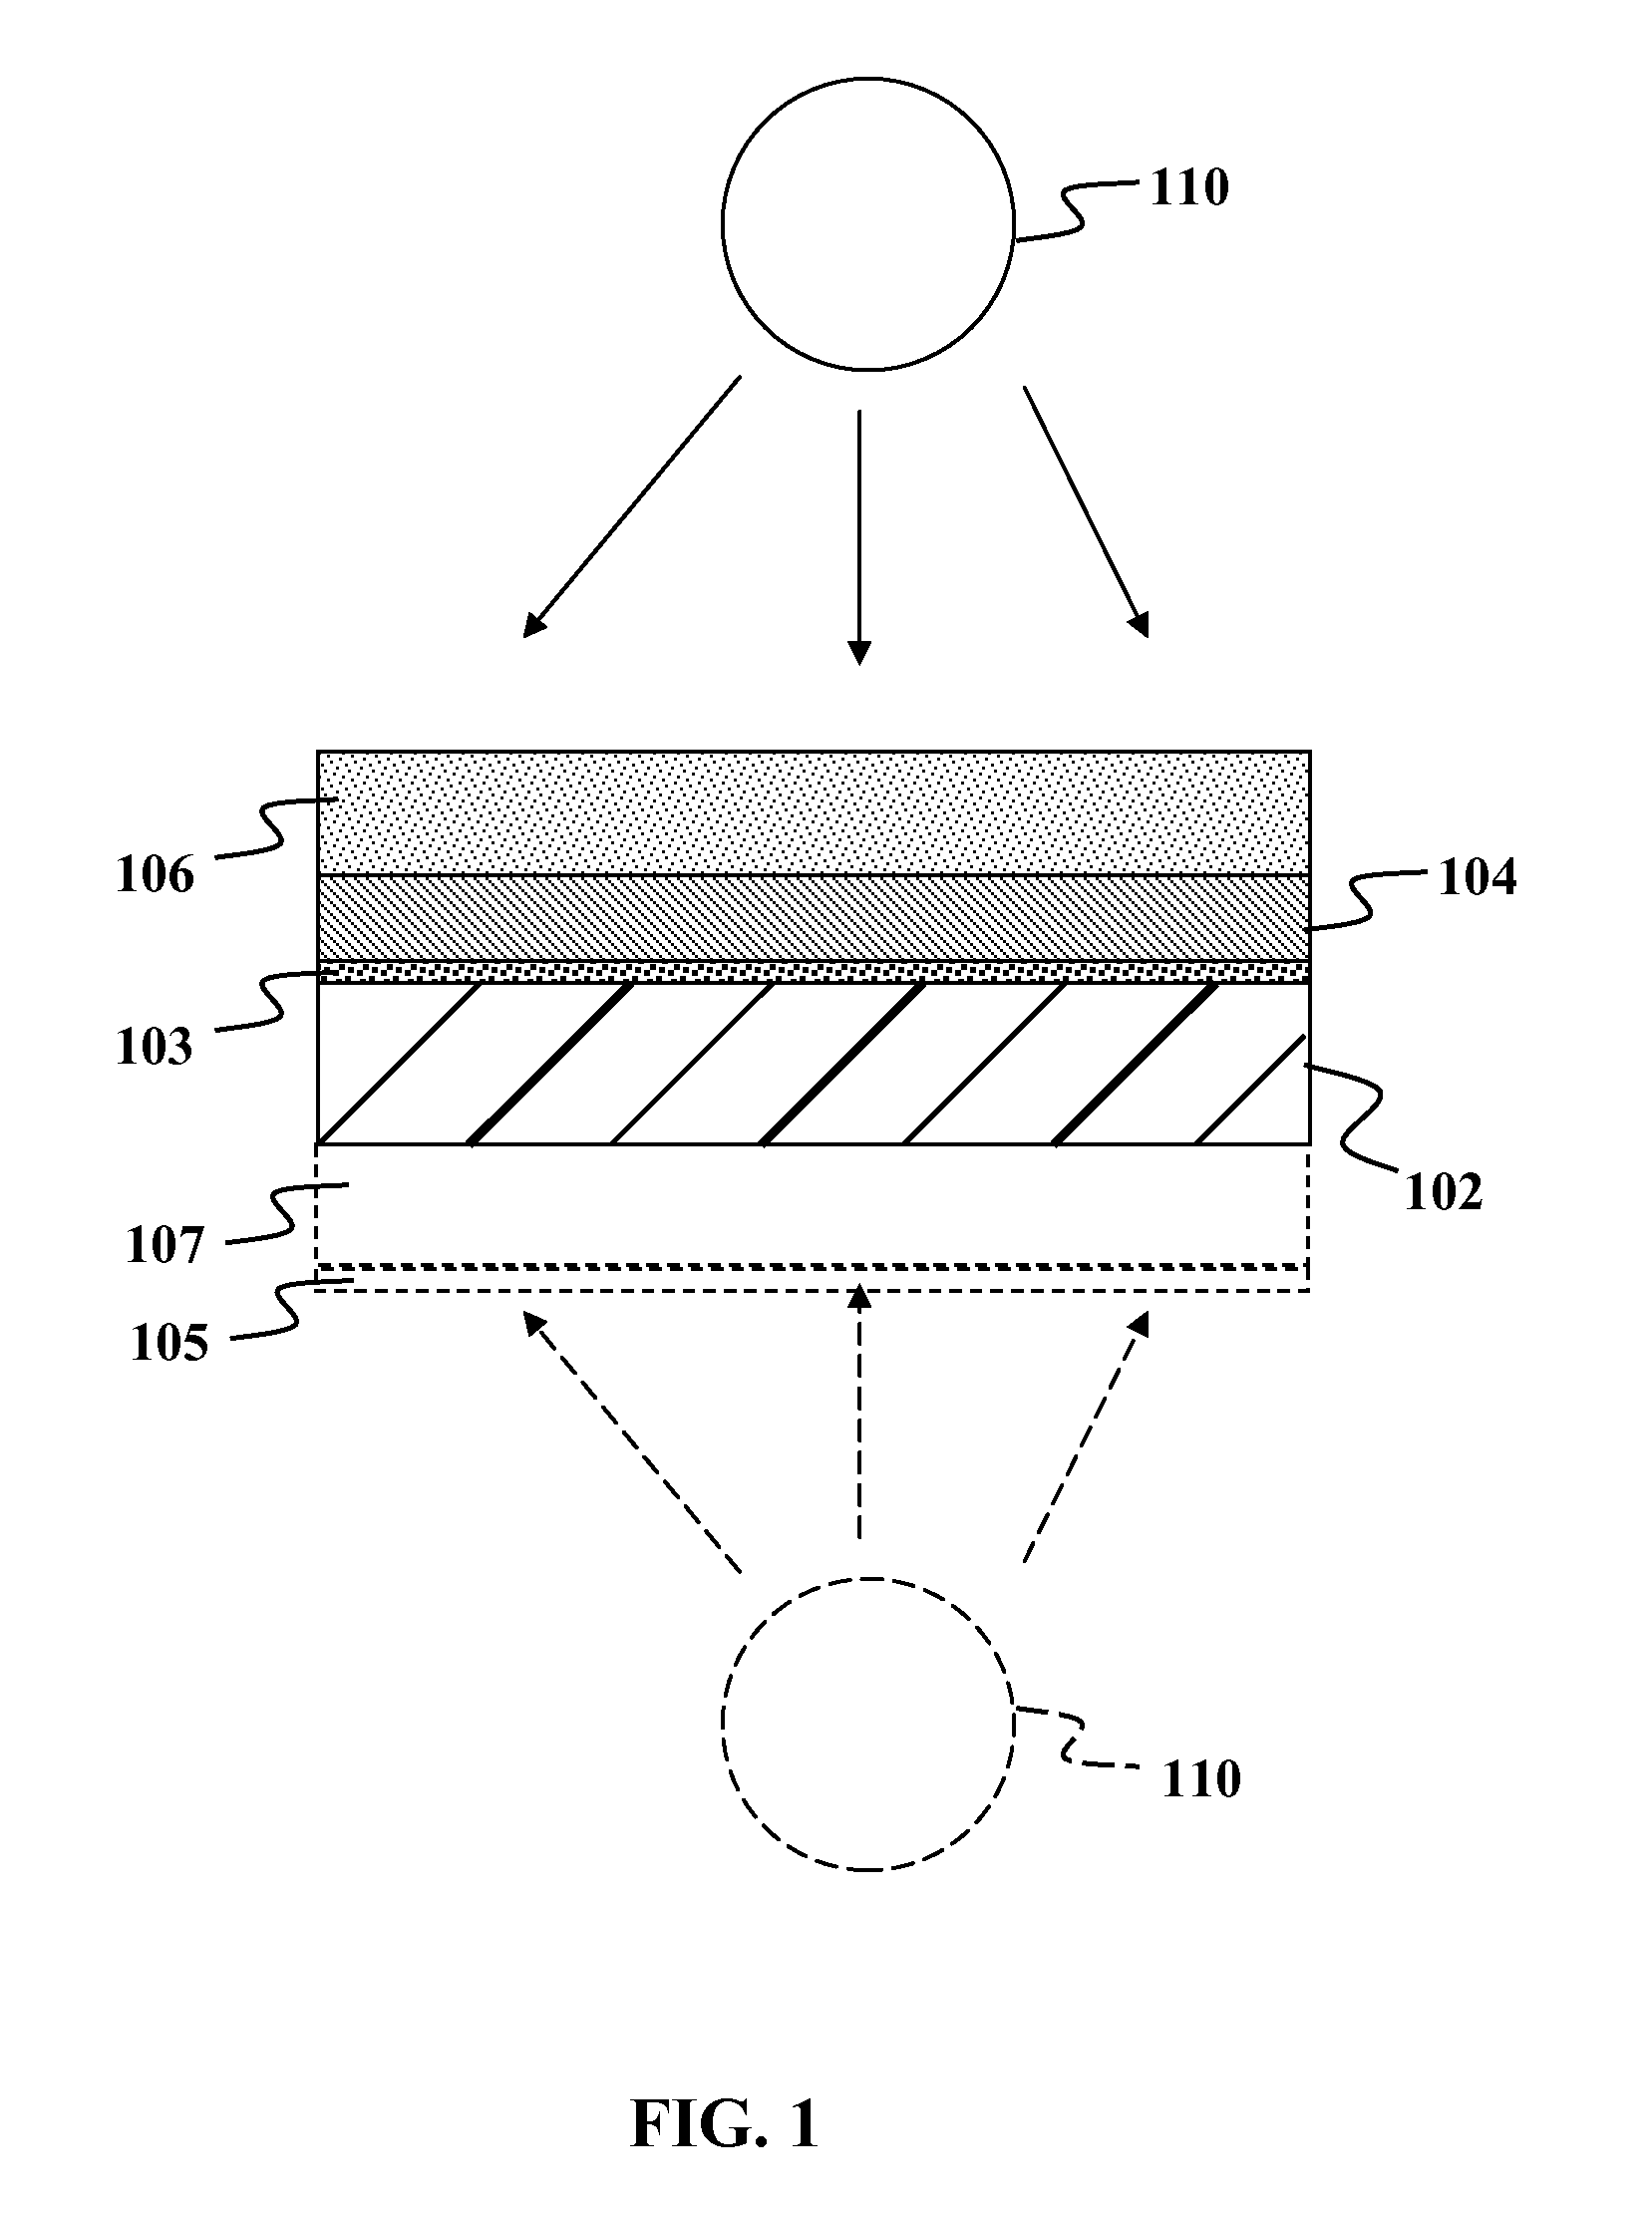 Formation of photovoltaic absorber layers on foil substrates